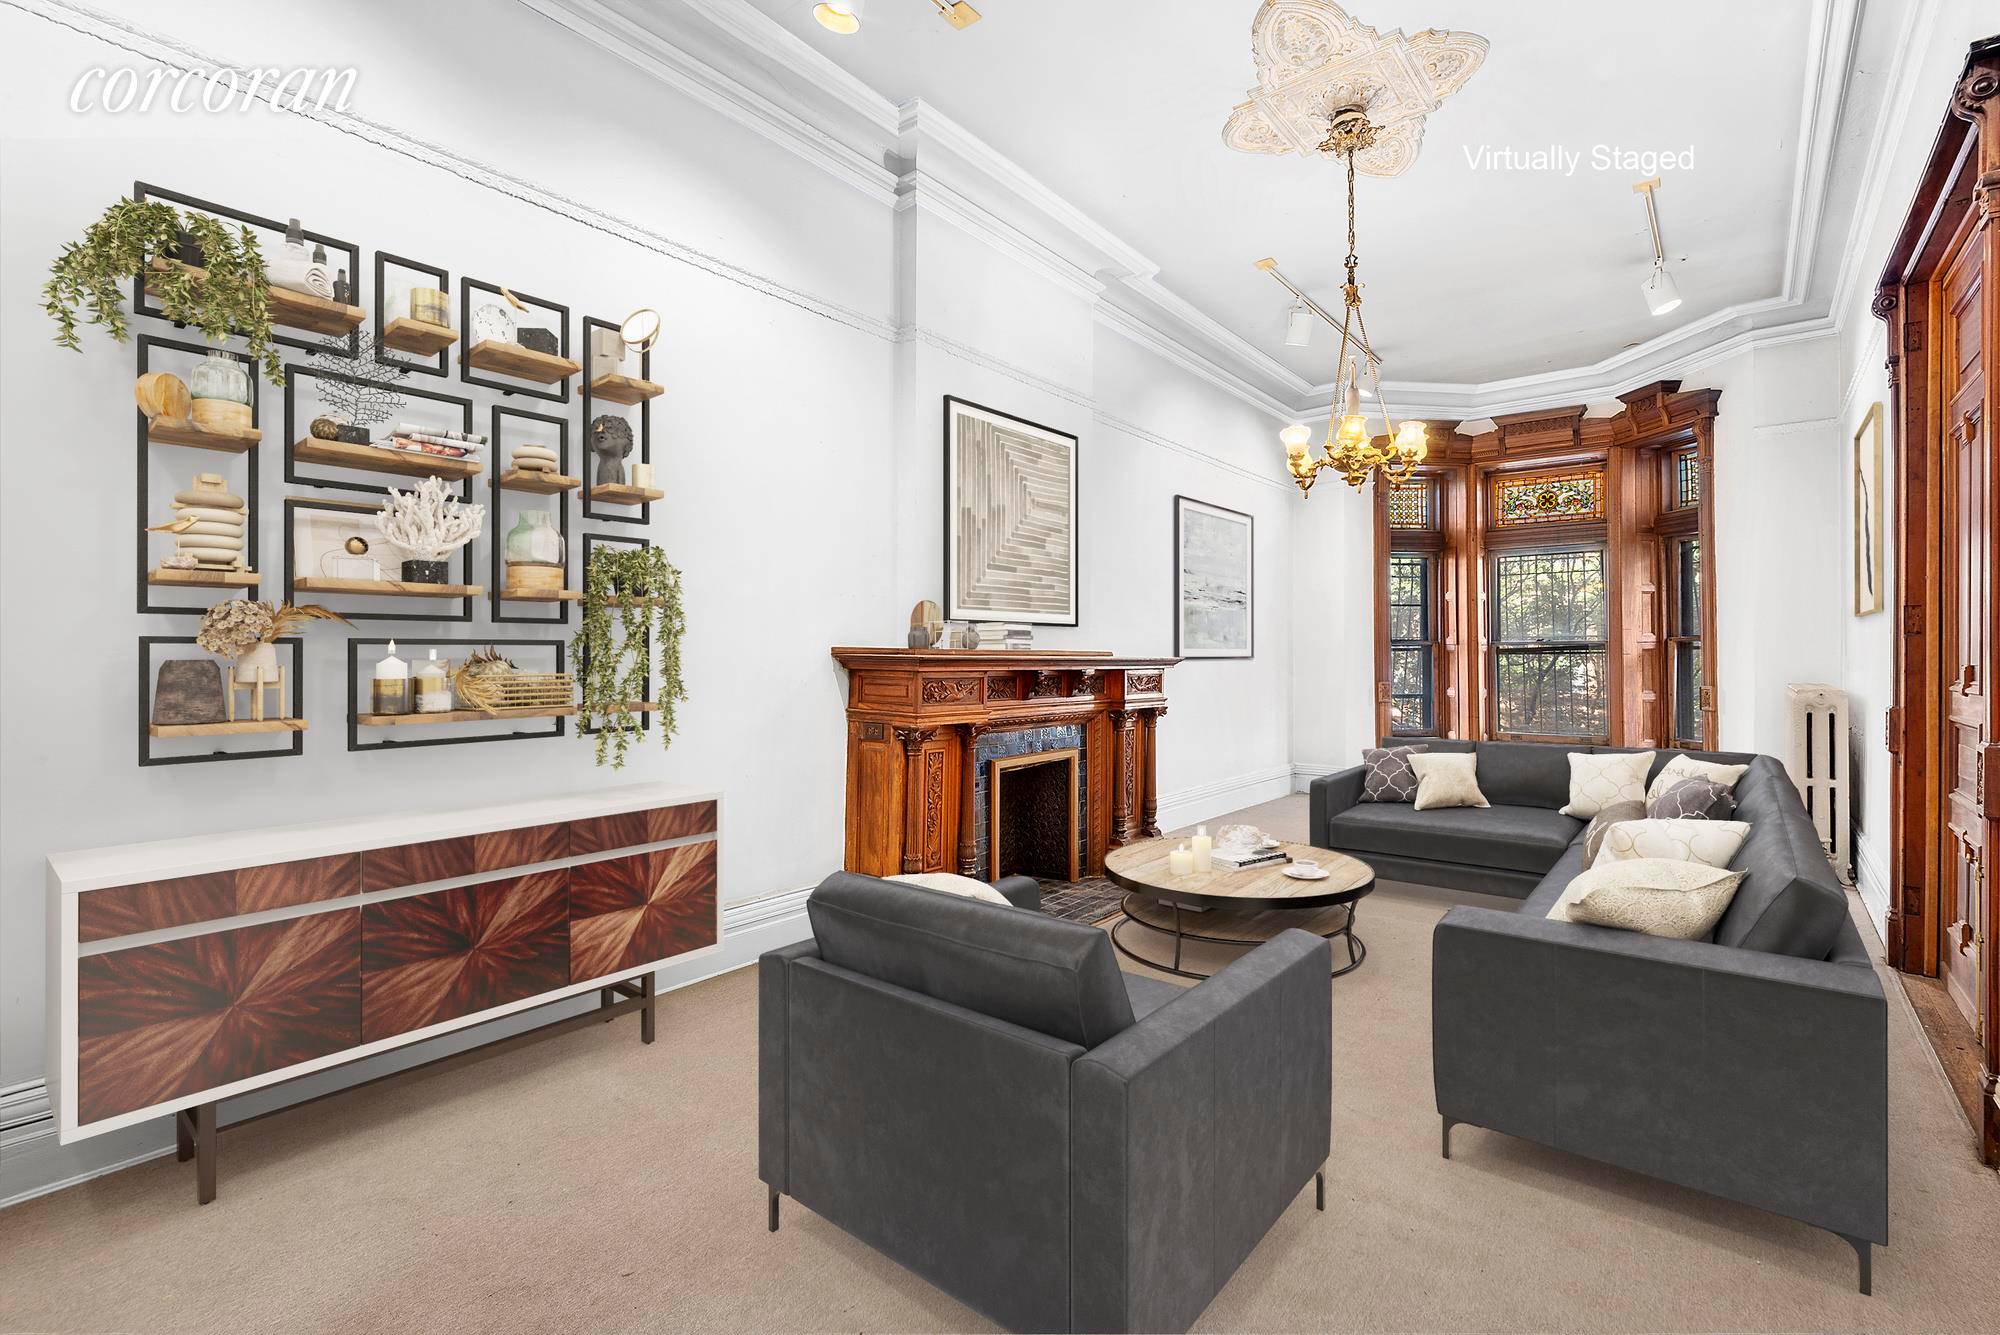 Spectacular 6000 sf brownstone awaits your customization in prime Park Slope.